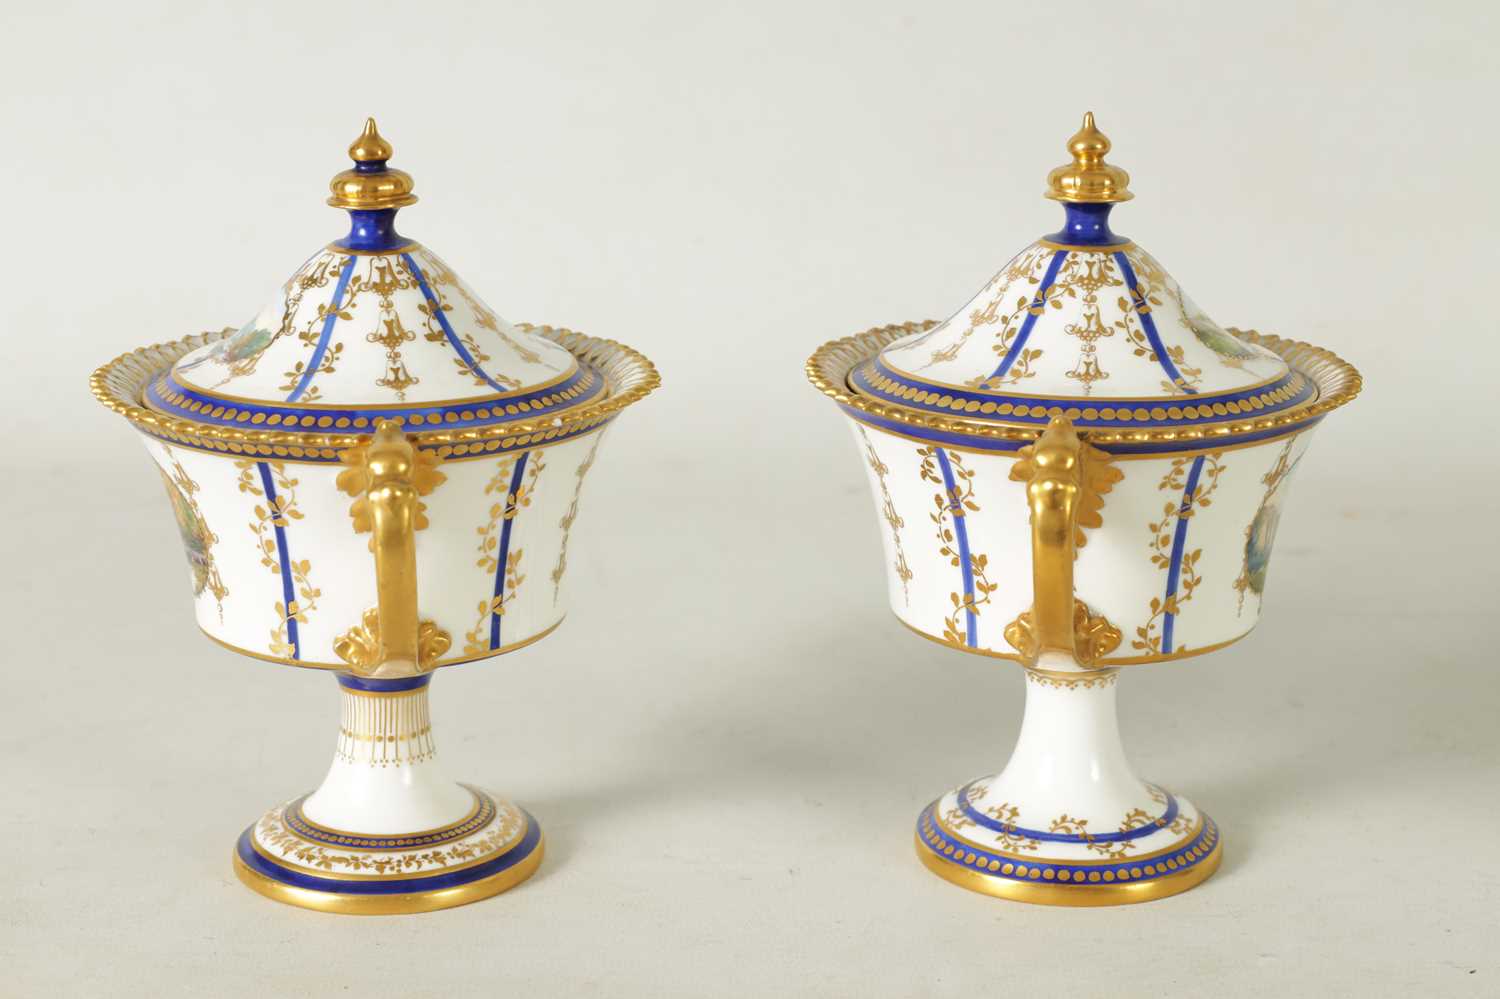 A FINE PAIR OF ROYAL CROWN DERBY CAMPANA SHAPED TWO-HANDLED PEDESTAL VASES AND COVERS - Image 15 of 22